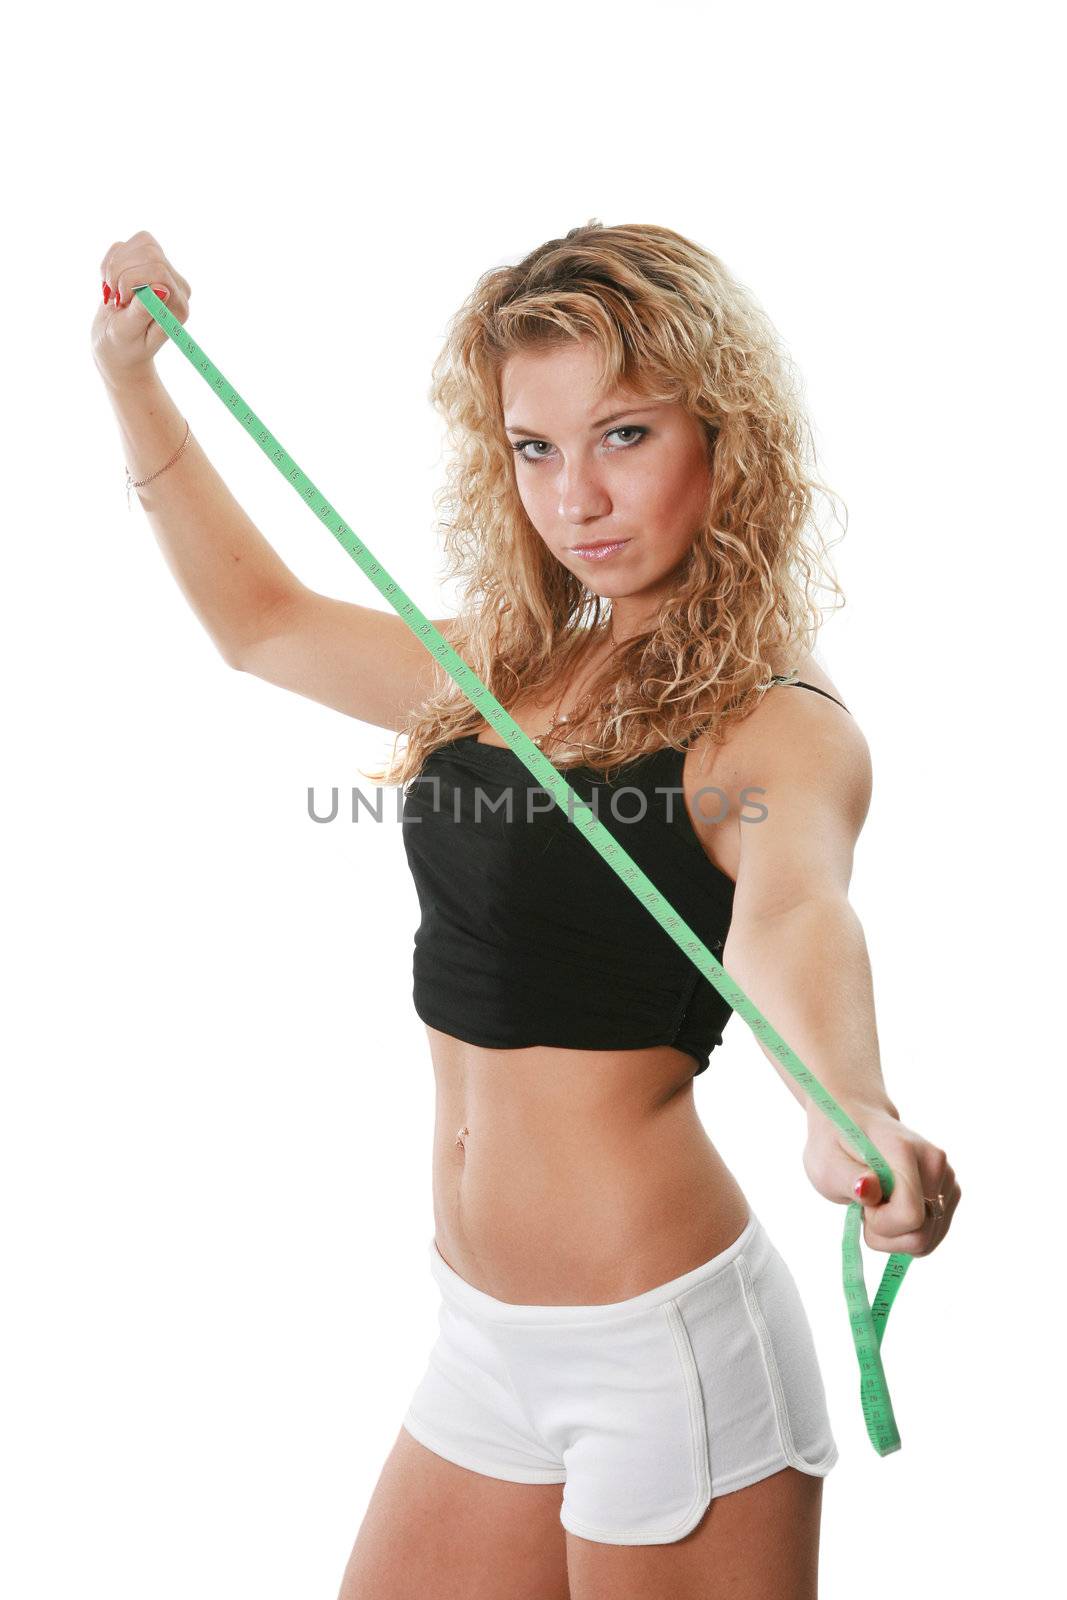 The sports attractive woman holds centimeter in hands